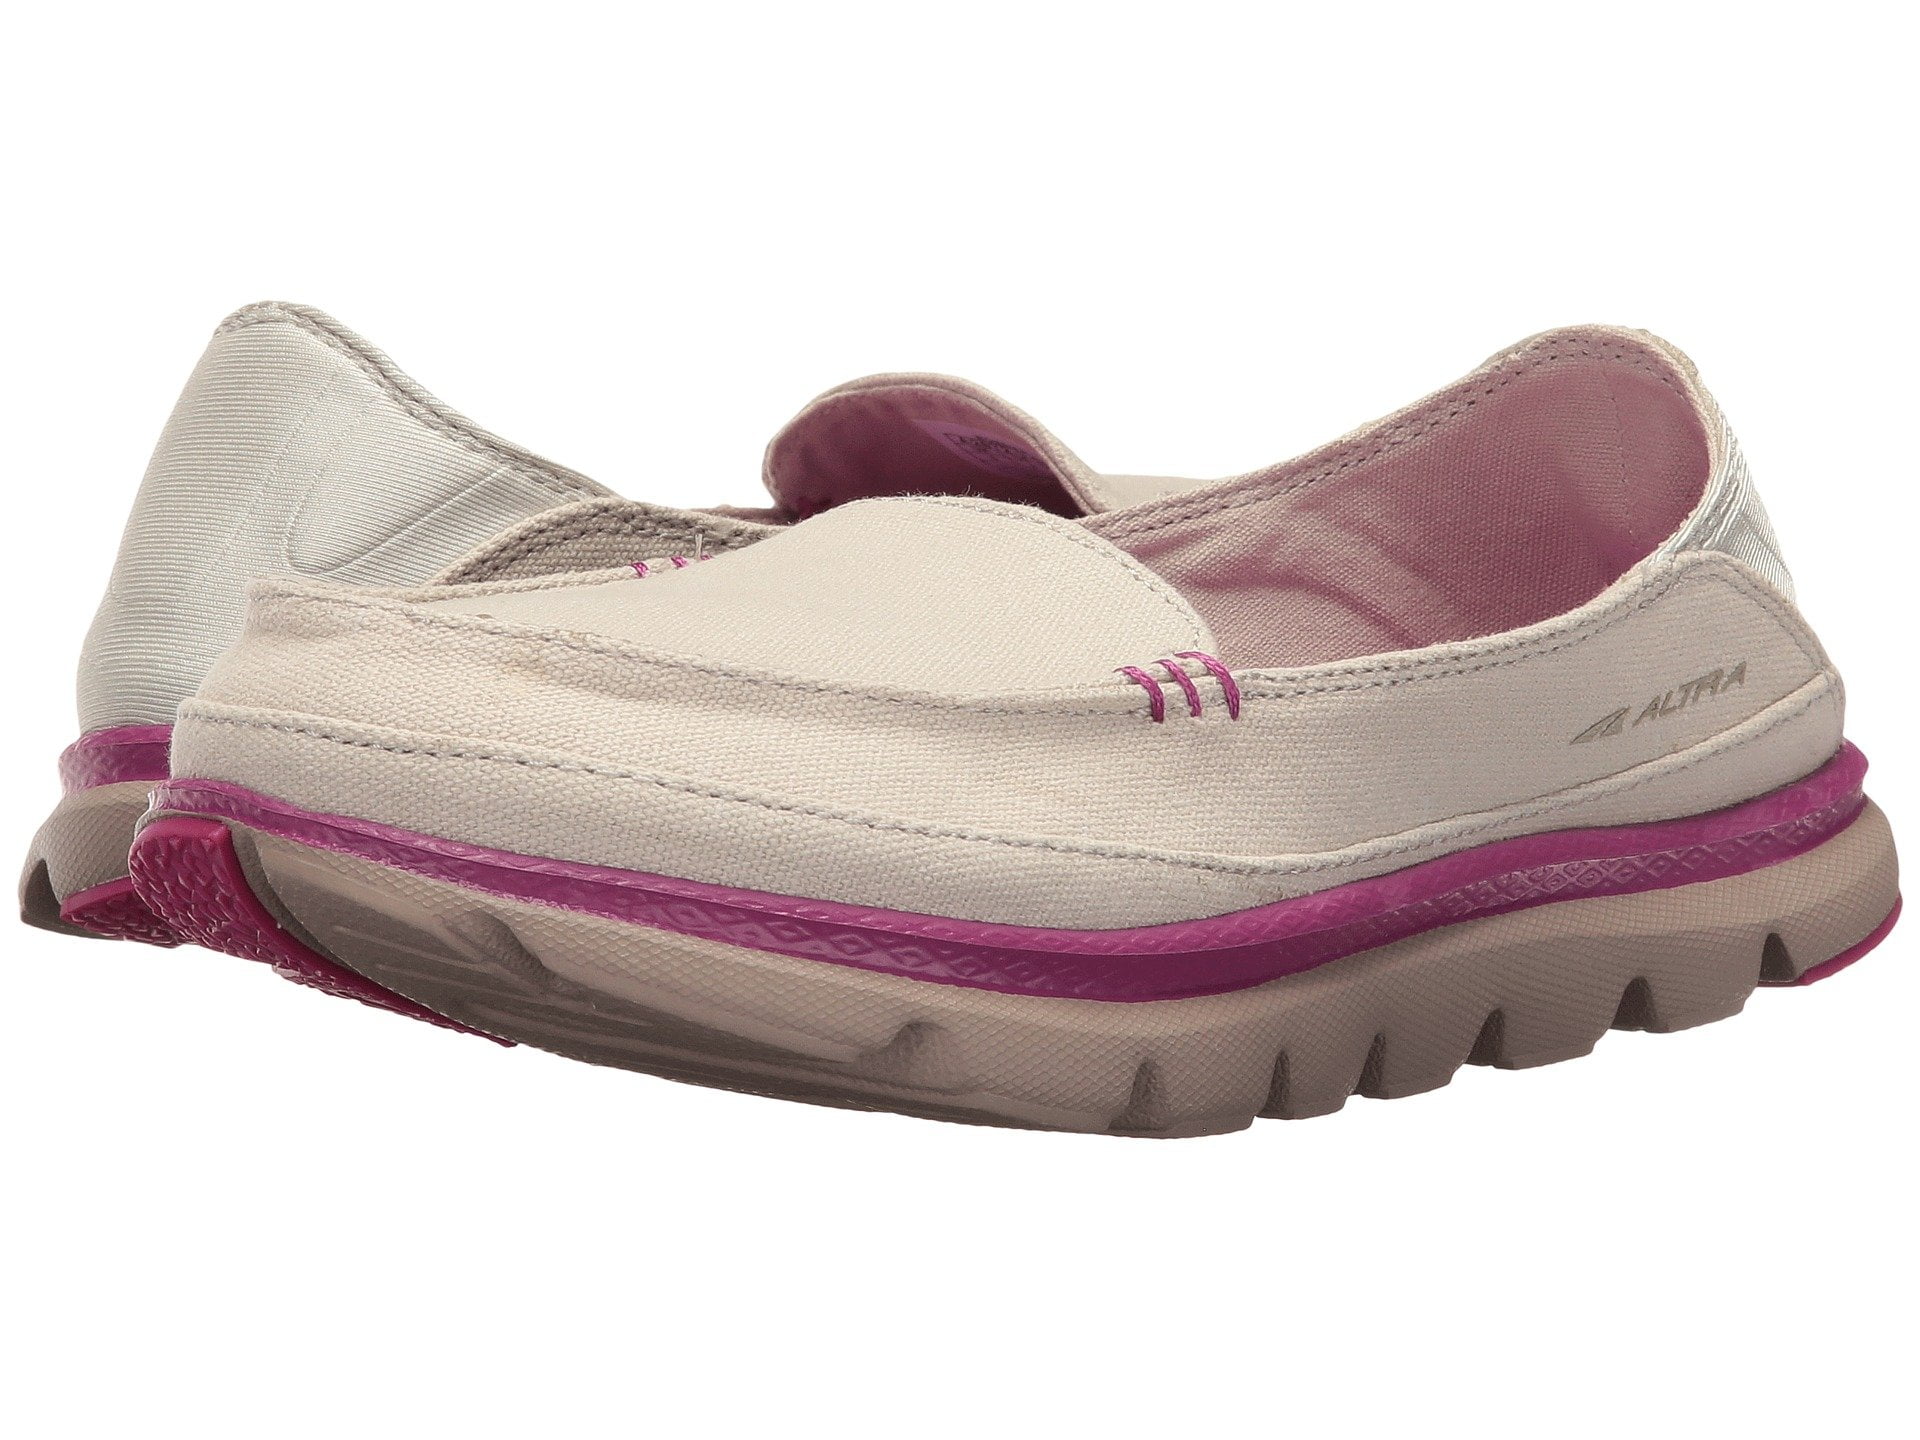 Altra Women's Tokala Casual Slip On Moc Shoes Taupe/Pink (8.0M)